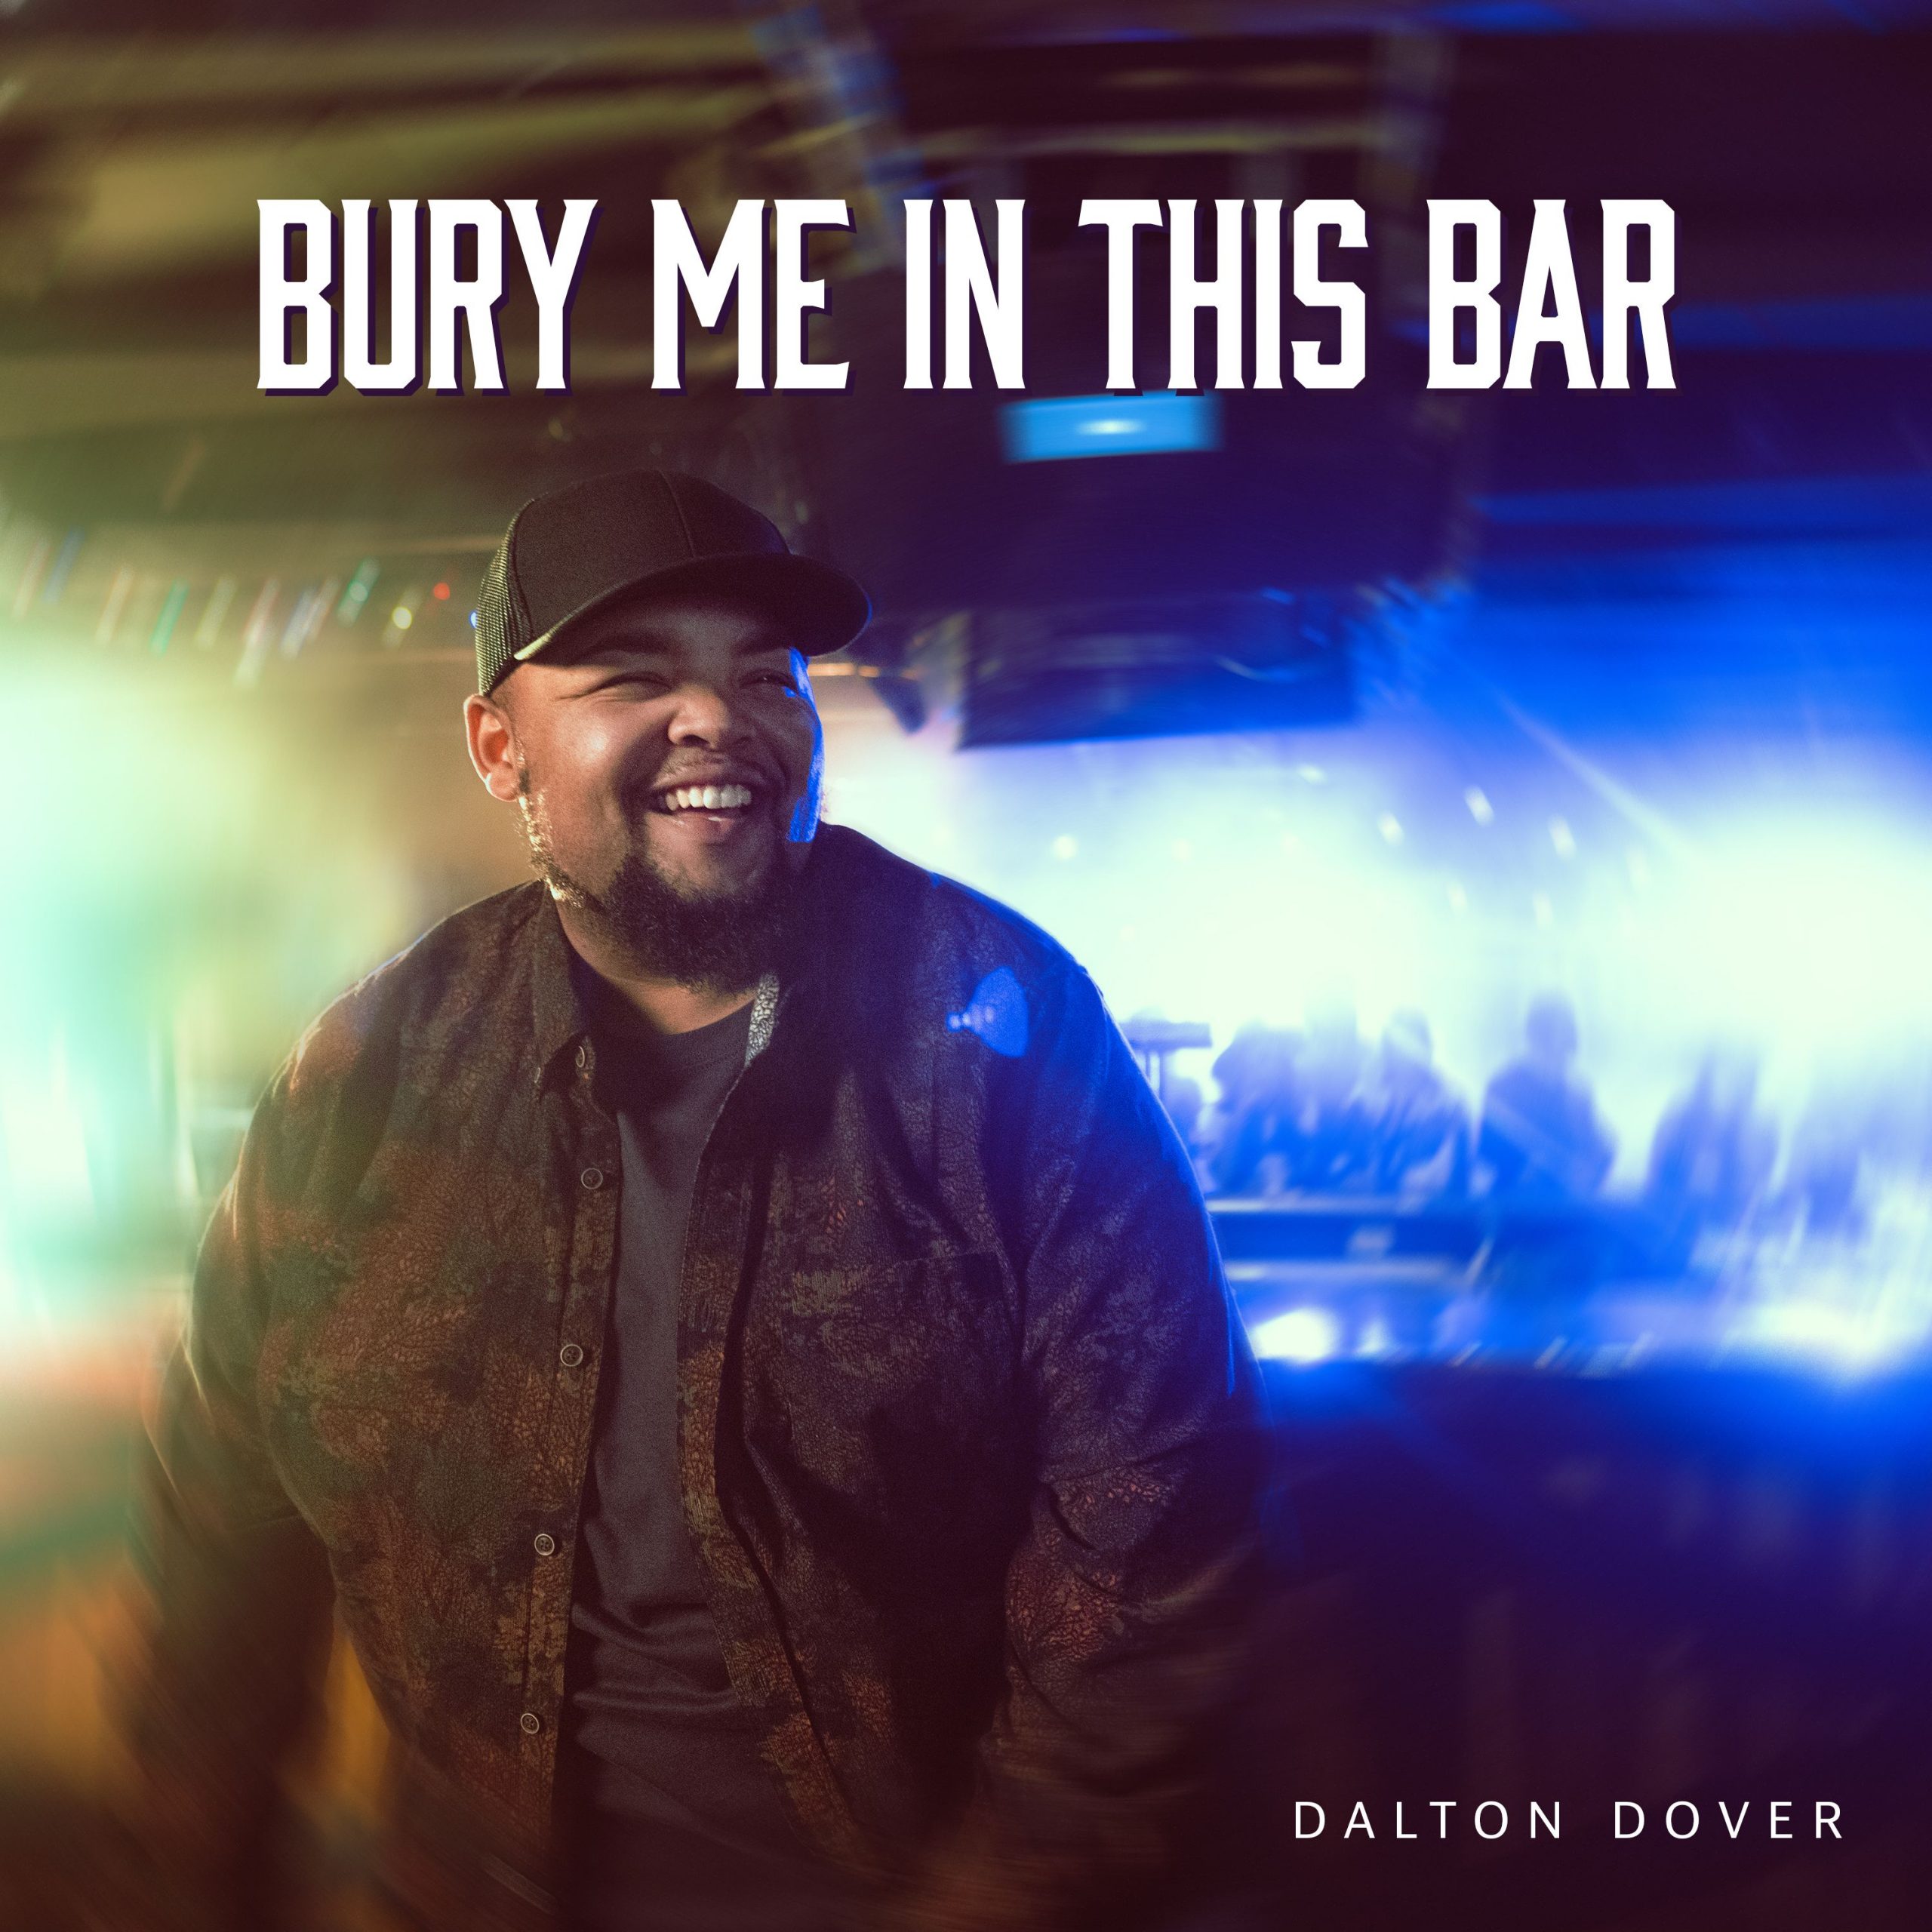 DALTON DOVER DELIVERS NEW SINGLE “BURY ME IN THIS BAR”